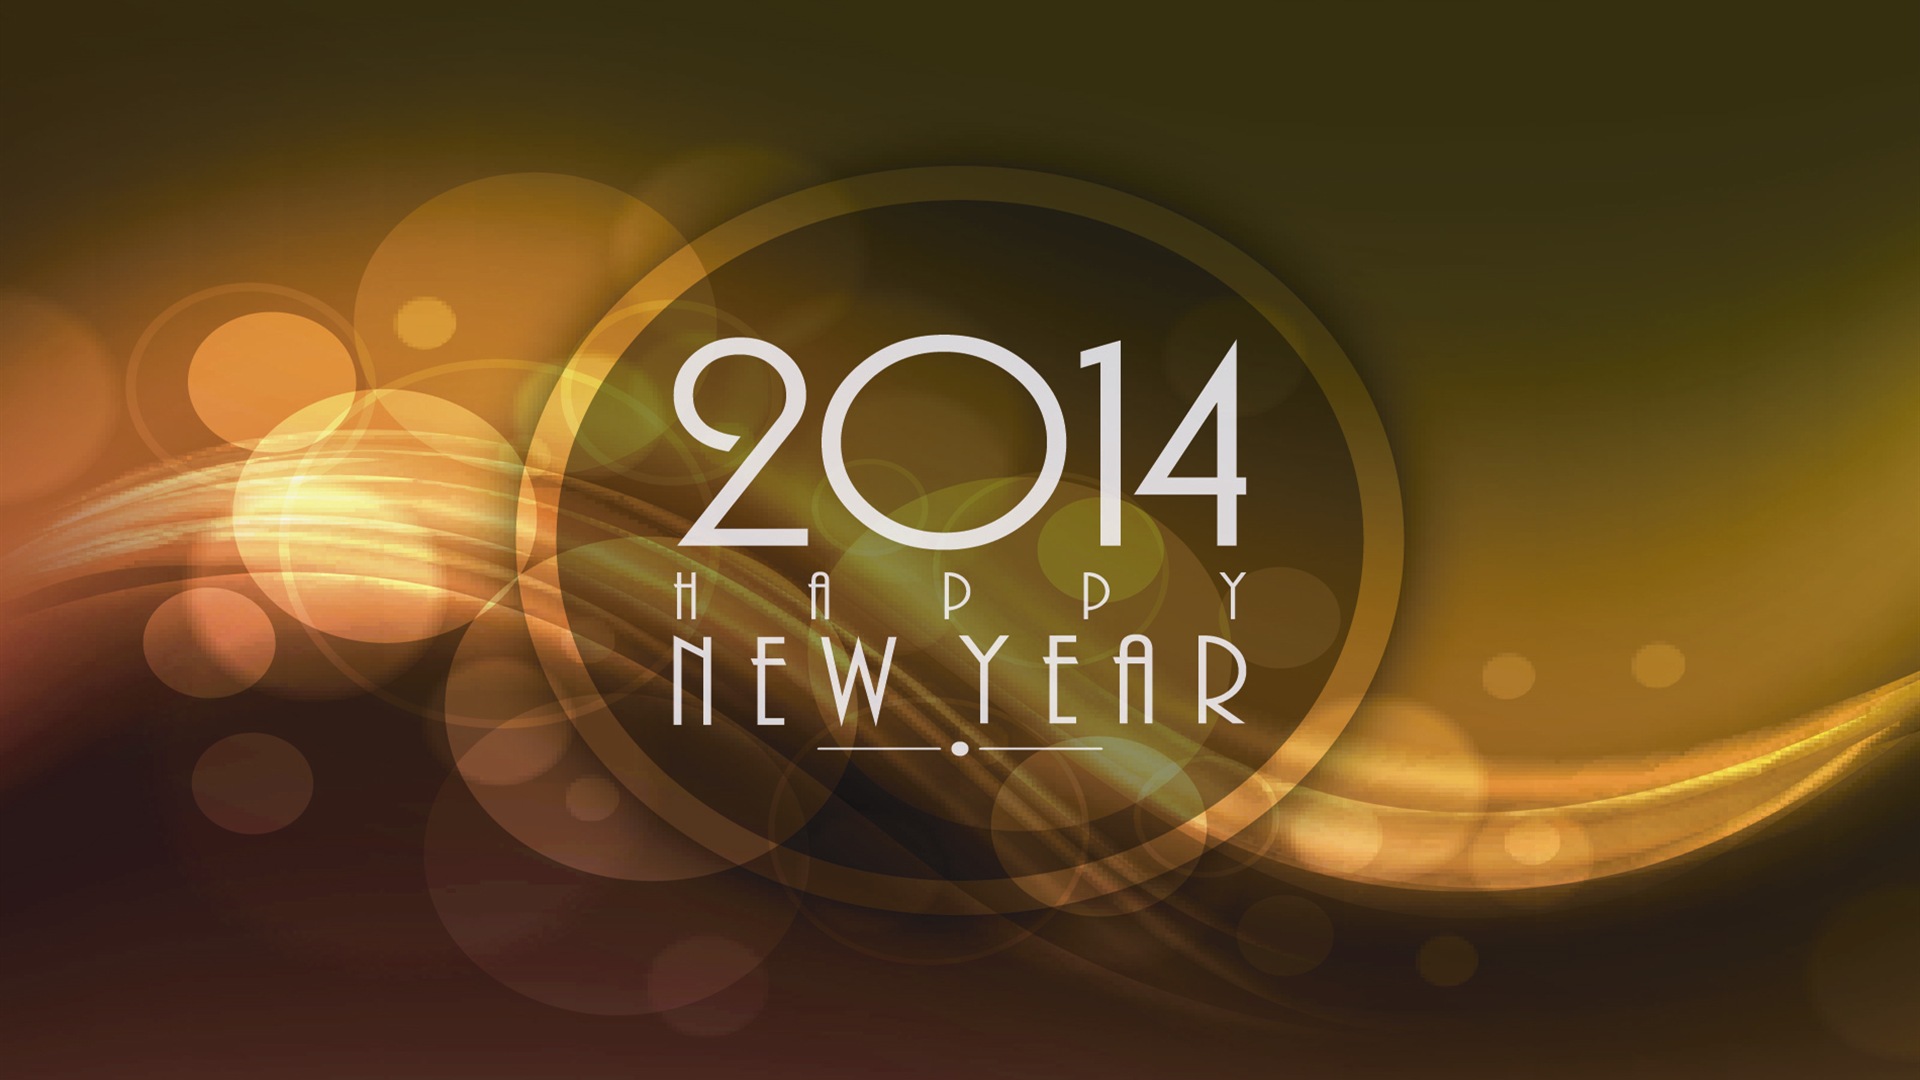 2014 New Year Theme HD Wallpapers (1) #4 - 1920x1080